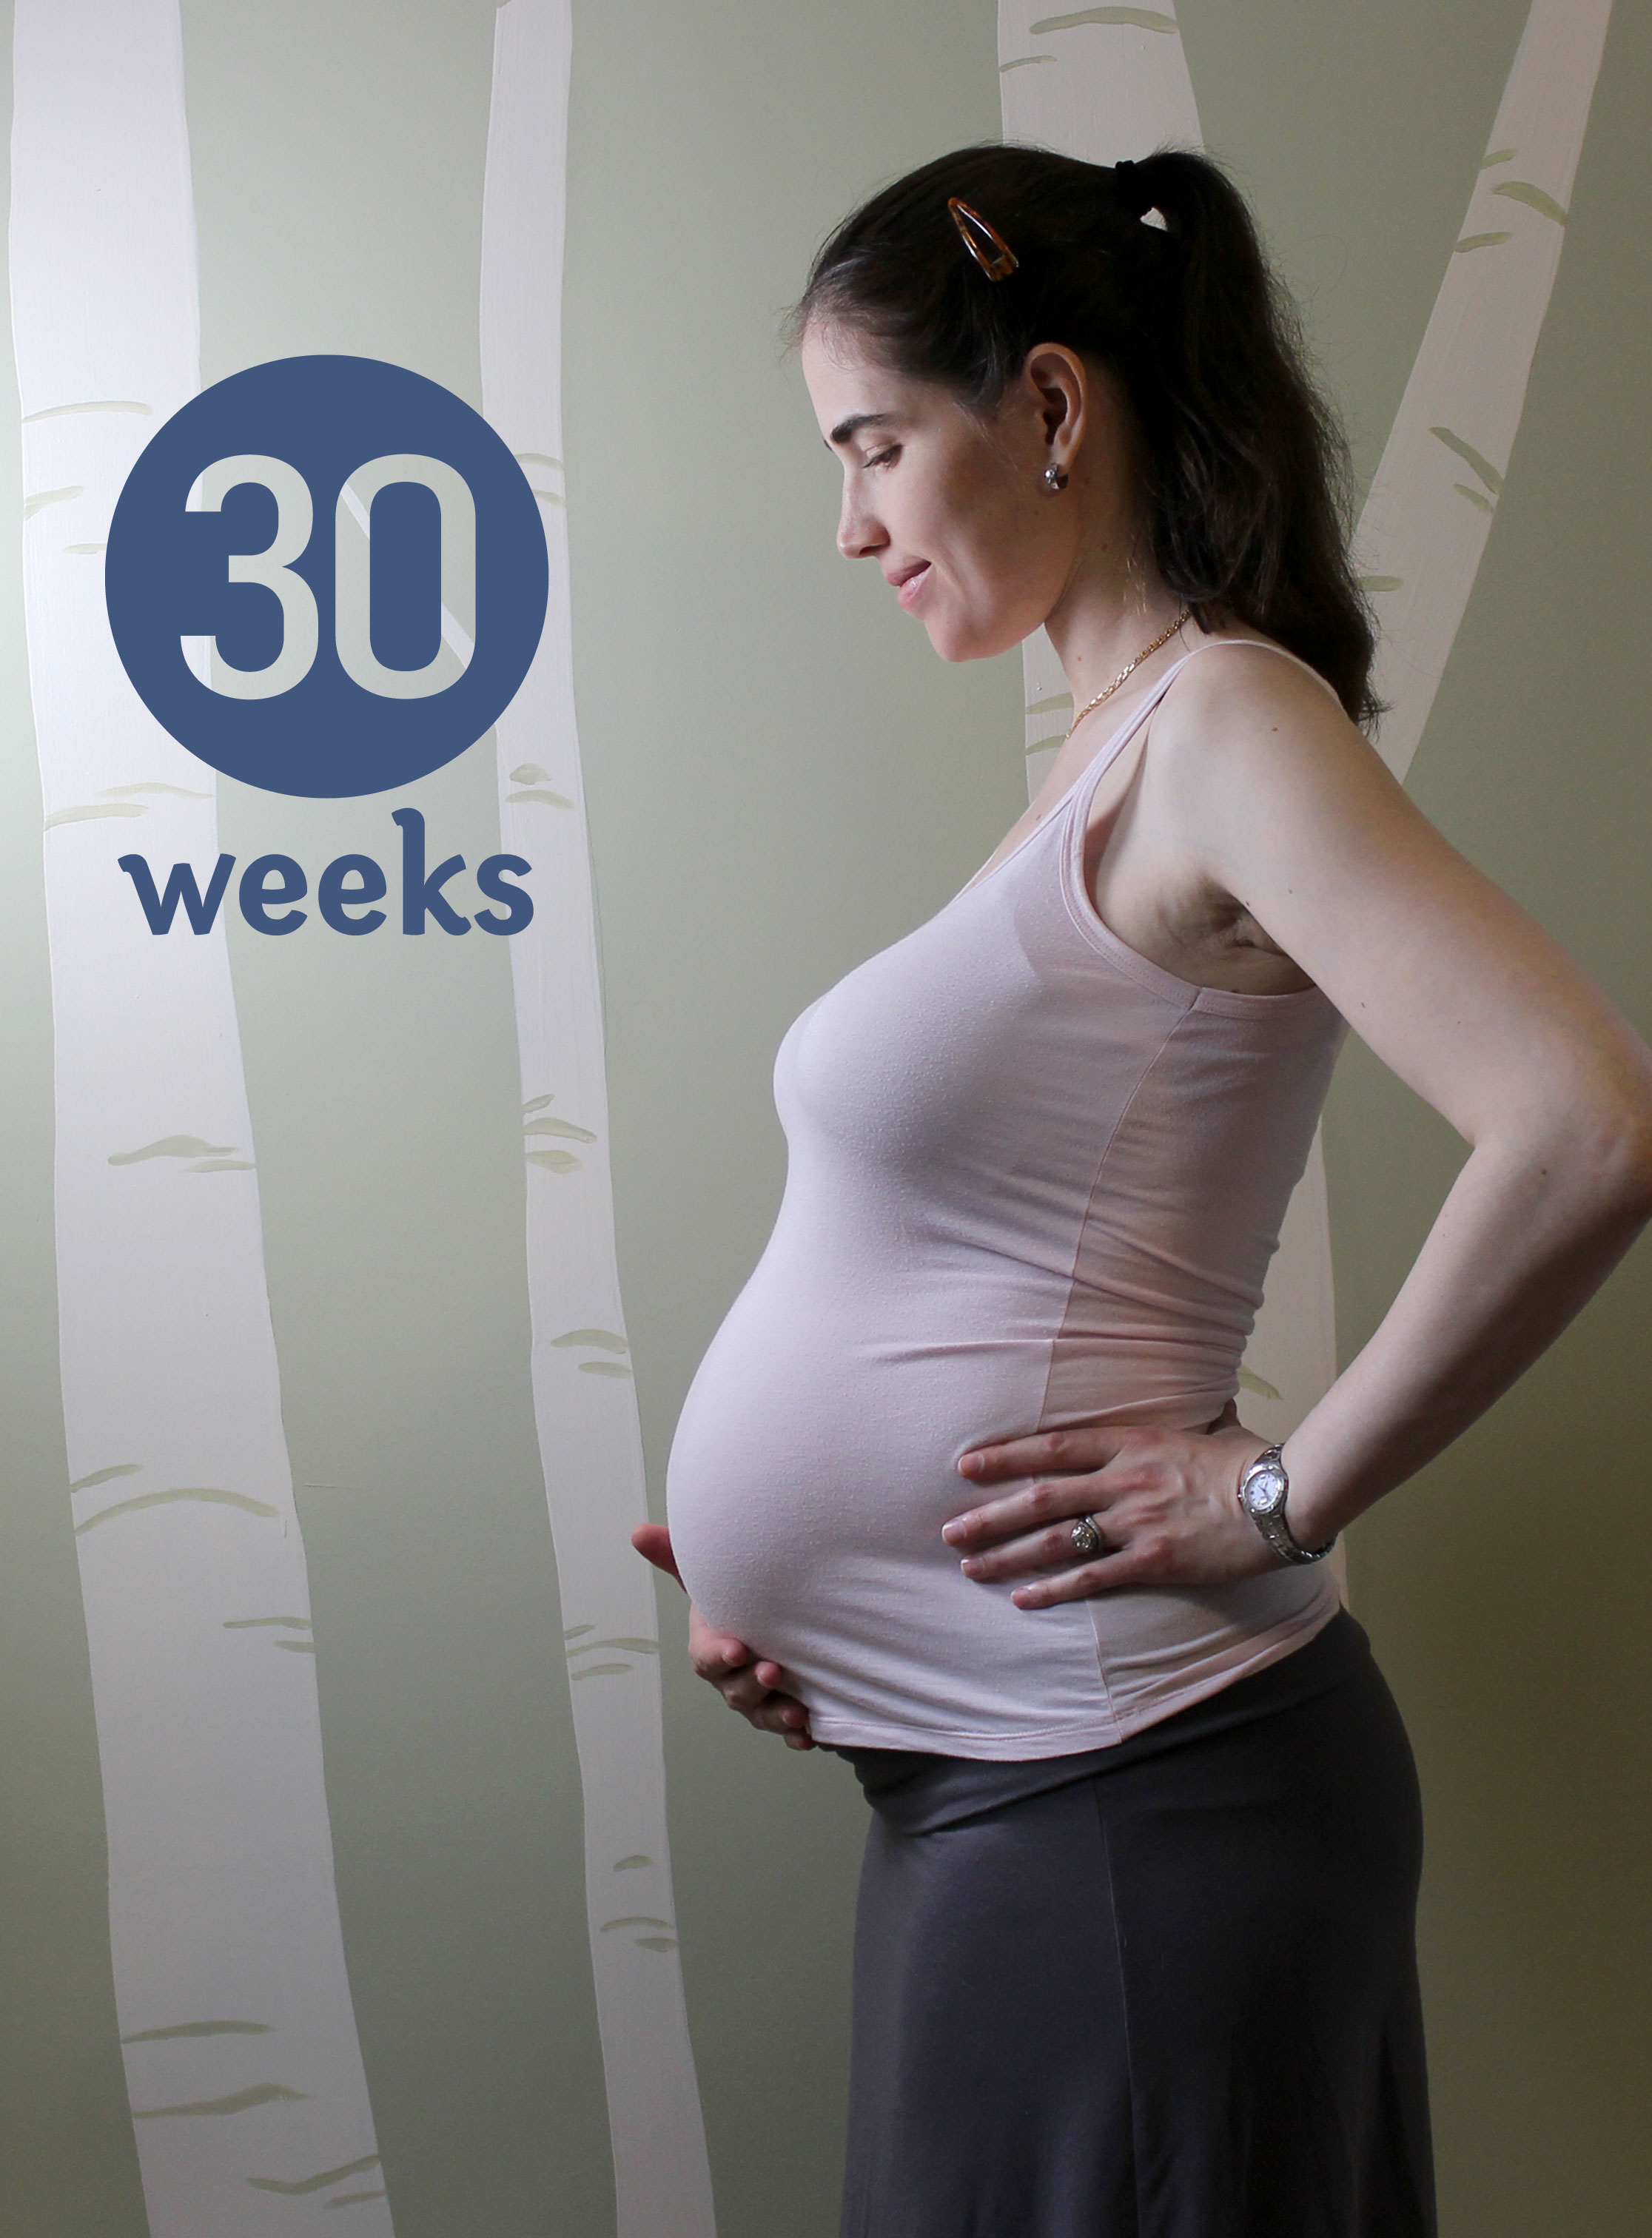 Baby Development After 30 Weeks Pregnant: What to Expect